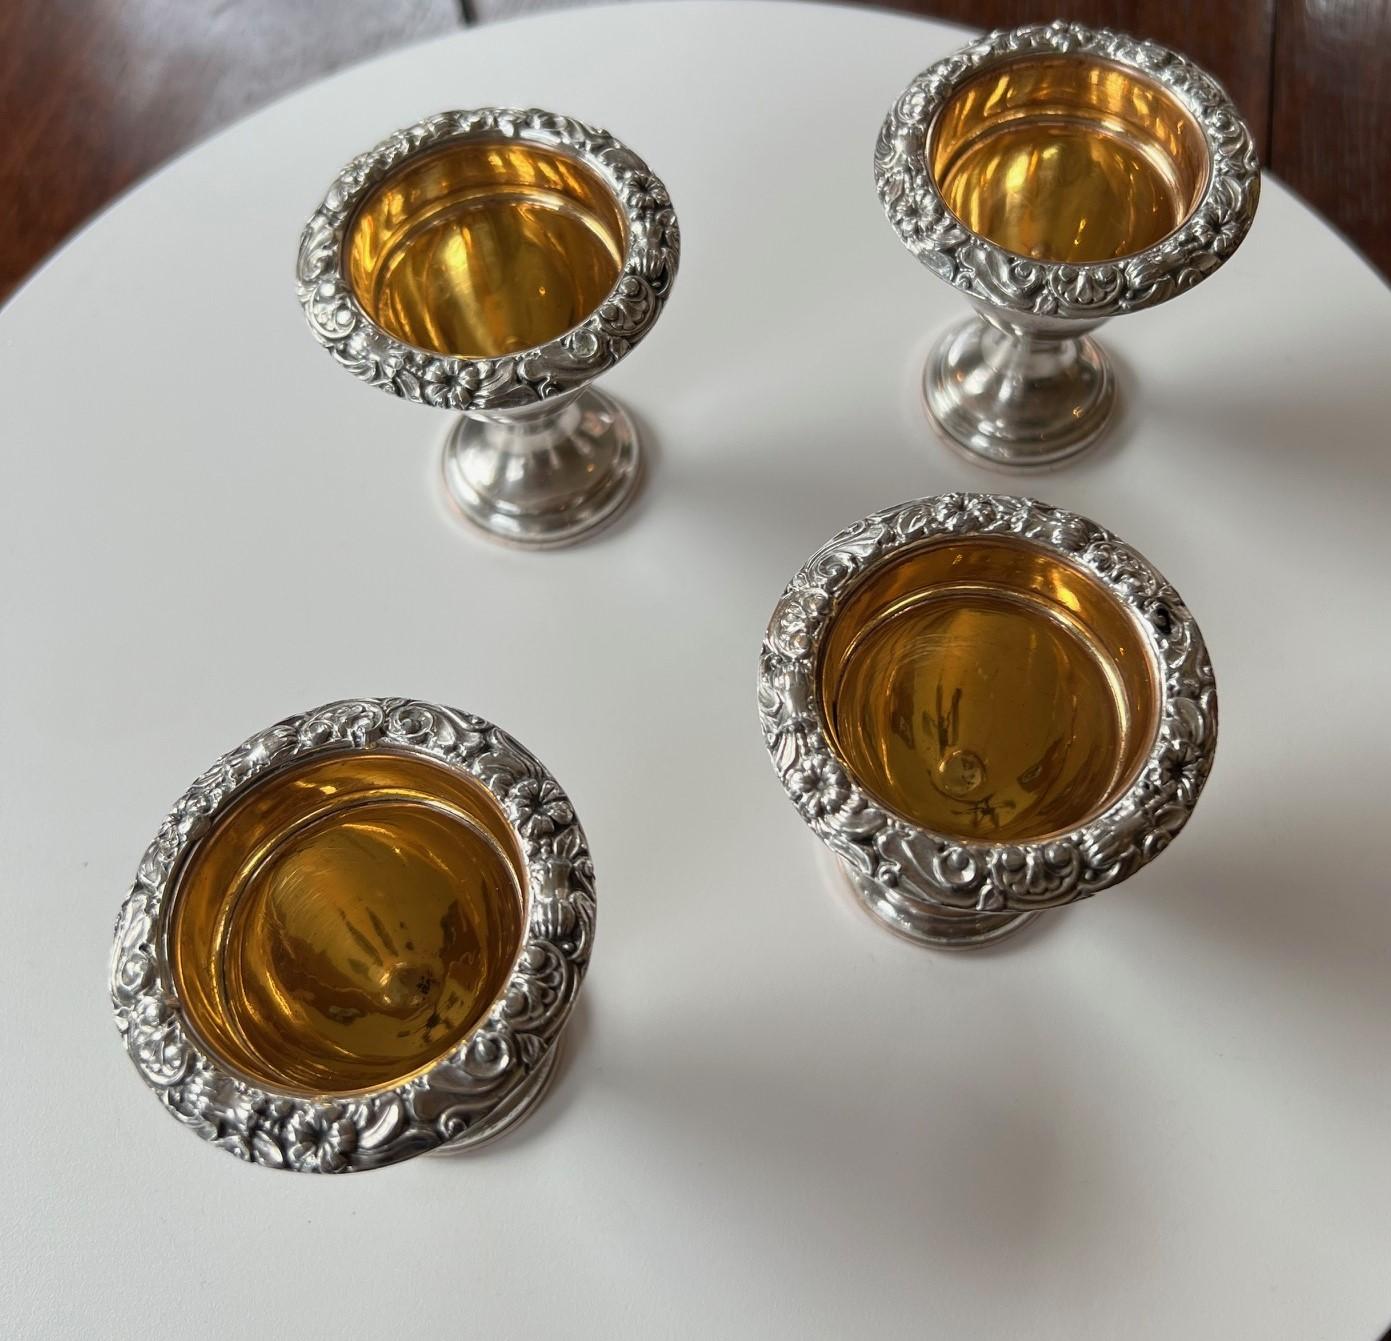 Silver Plate Antique Silverplate and Gilt Egg Cups - Set of 4 For Sale